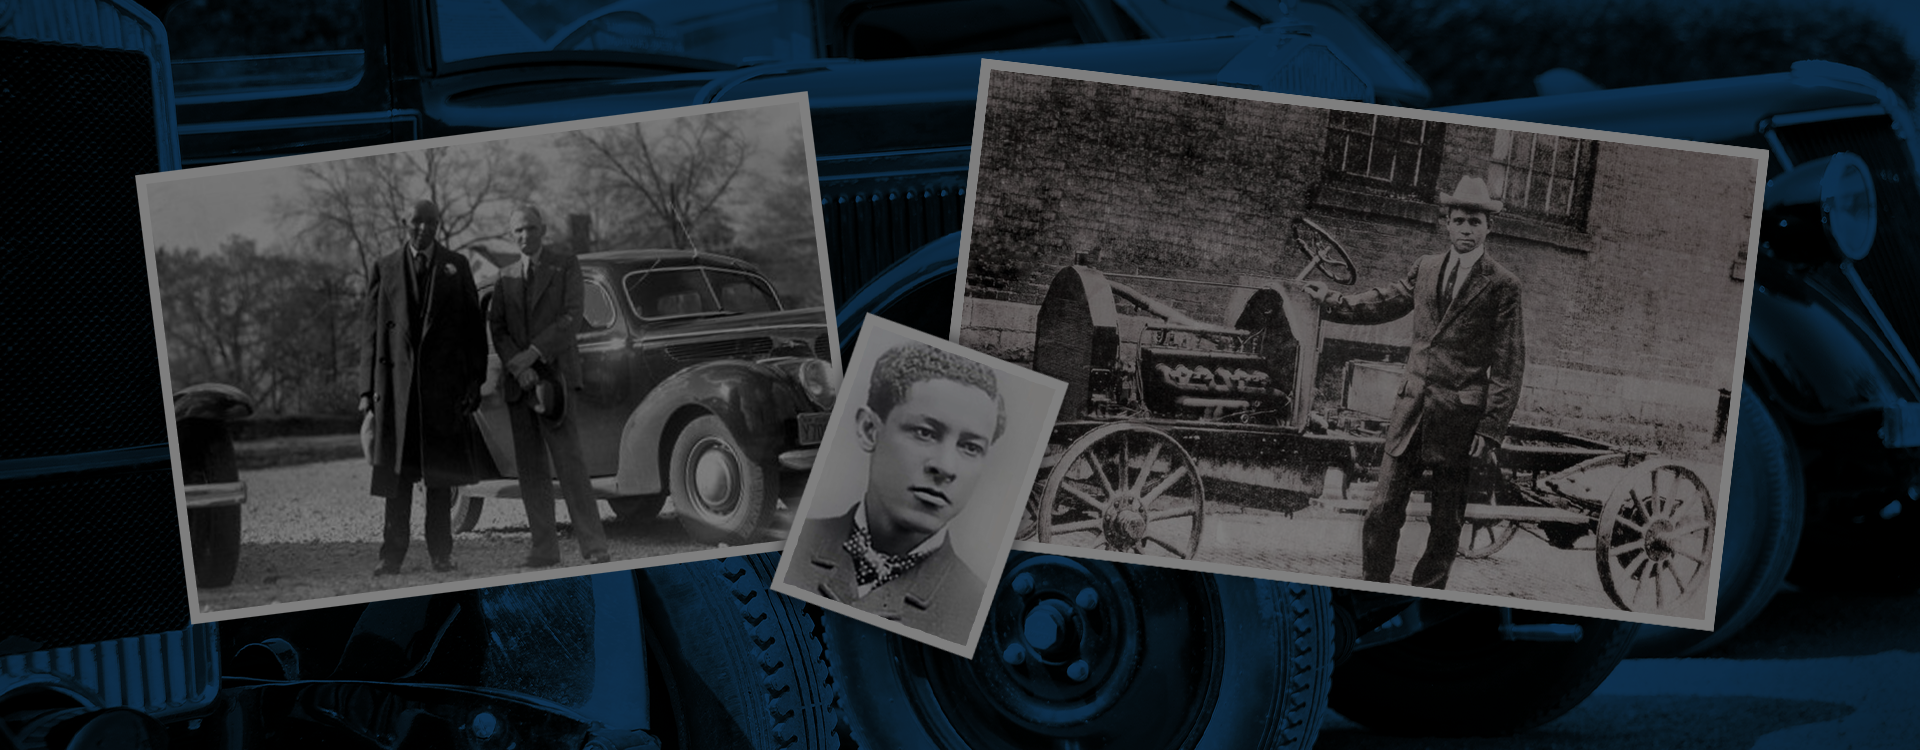 Black History Month in the Automotive Industry